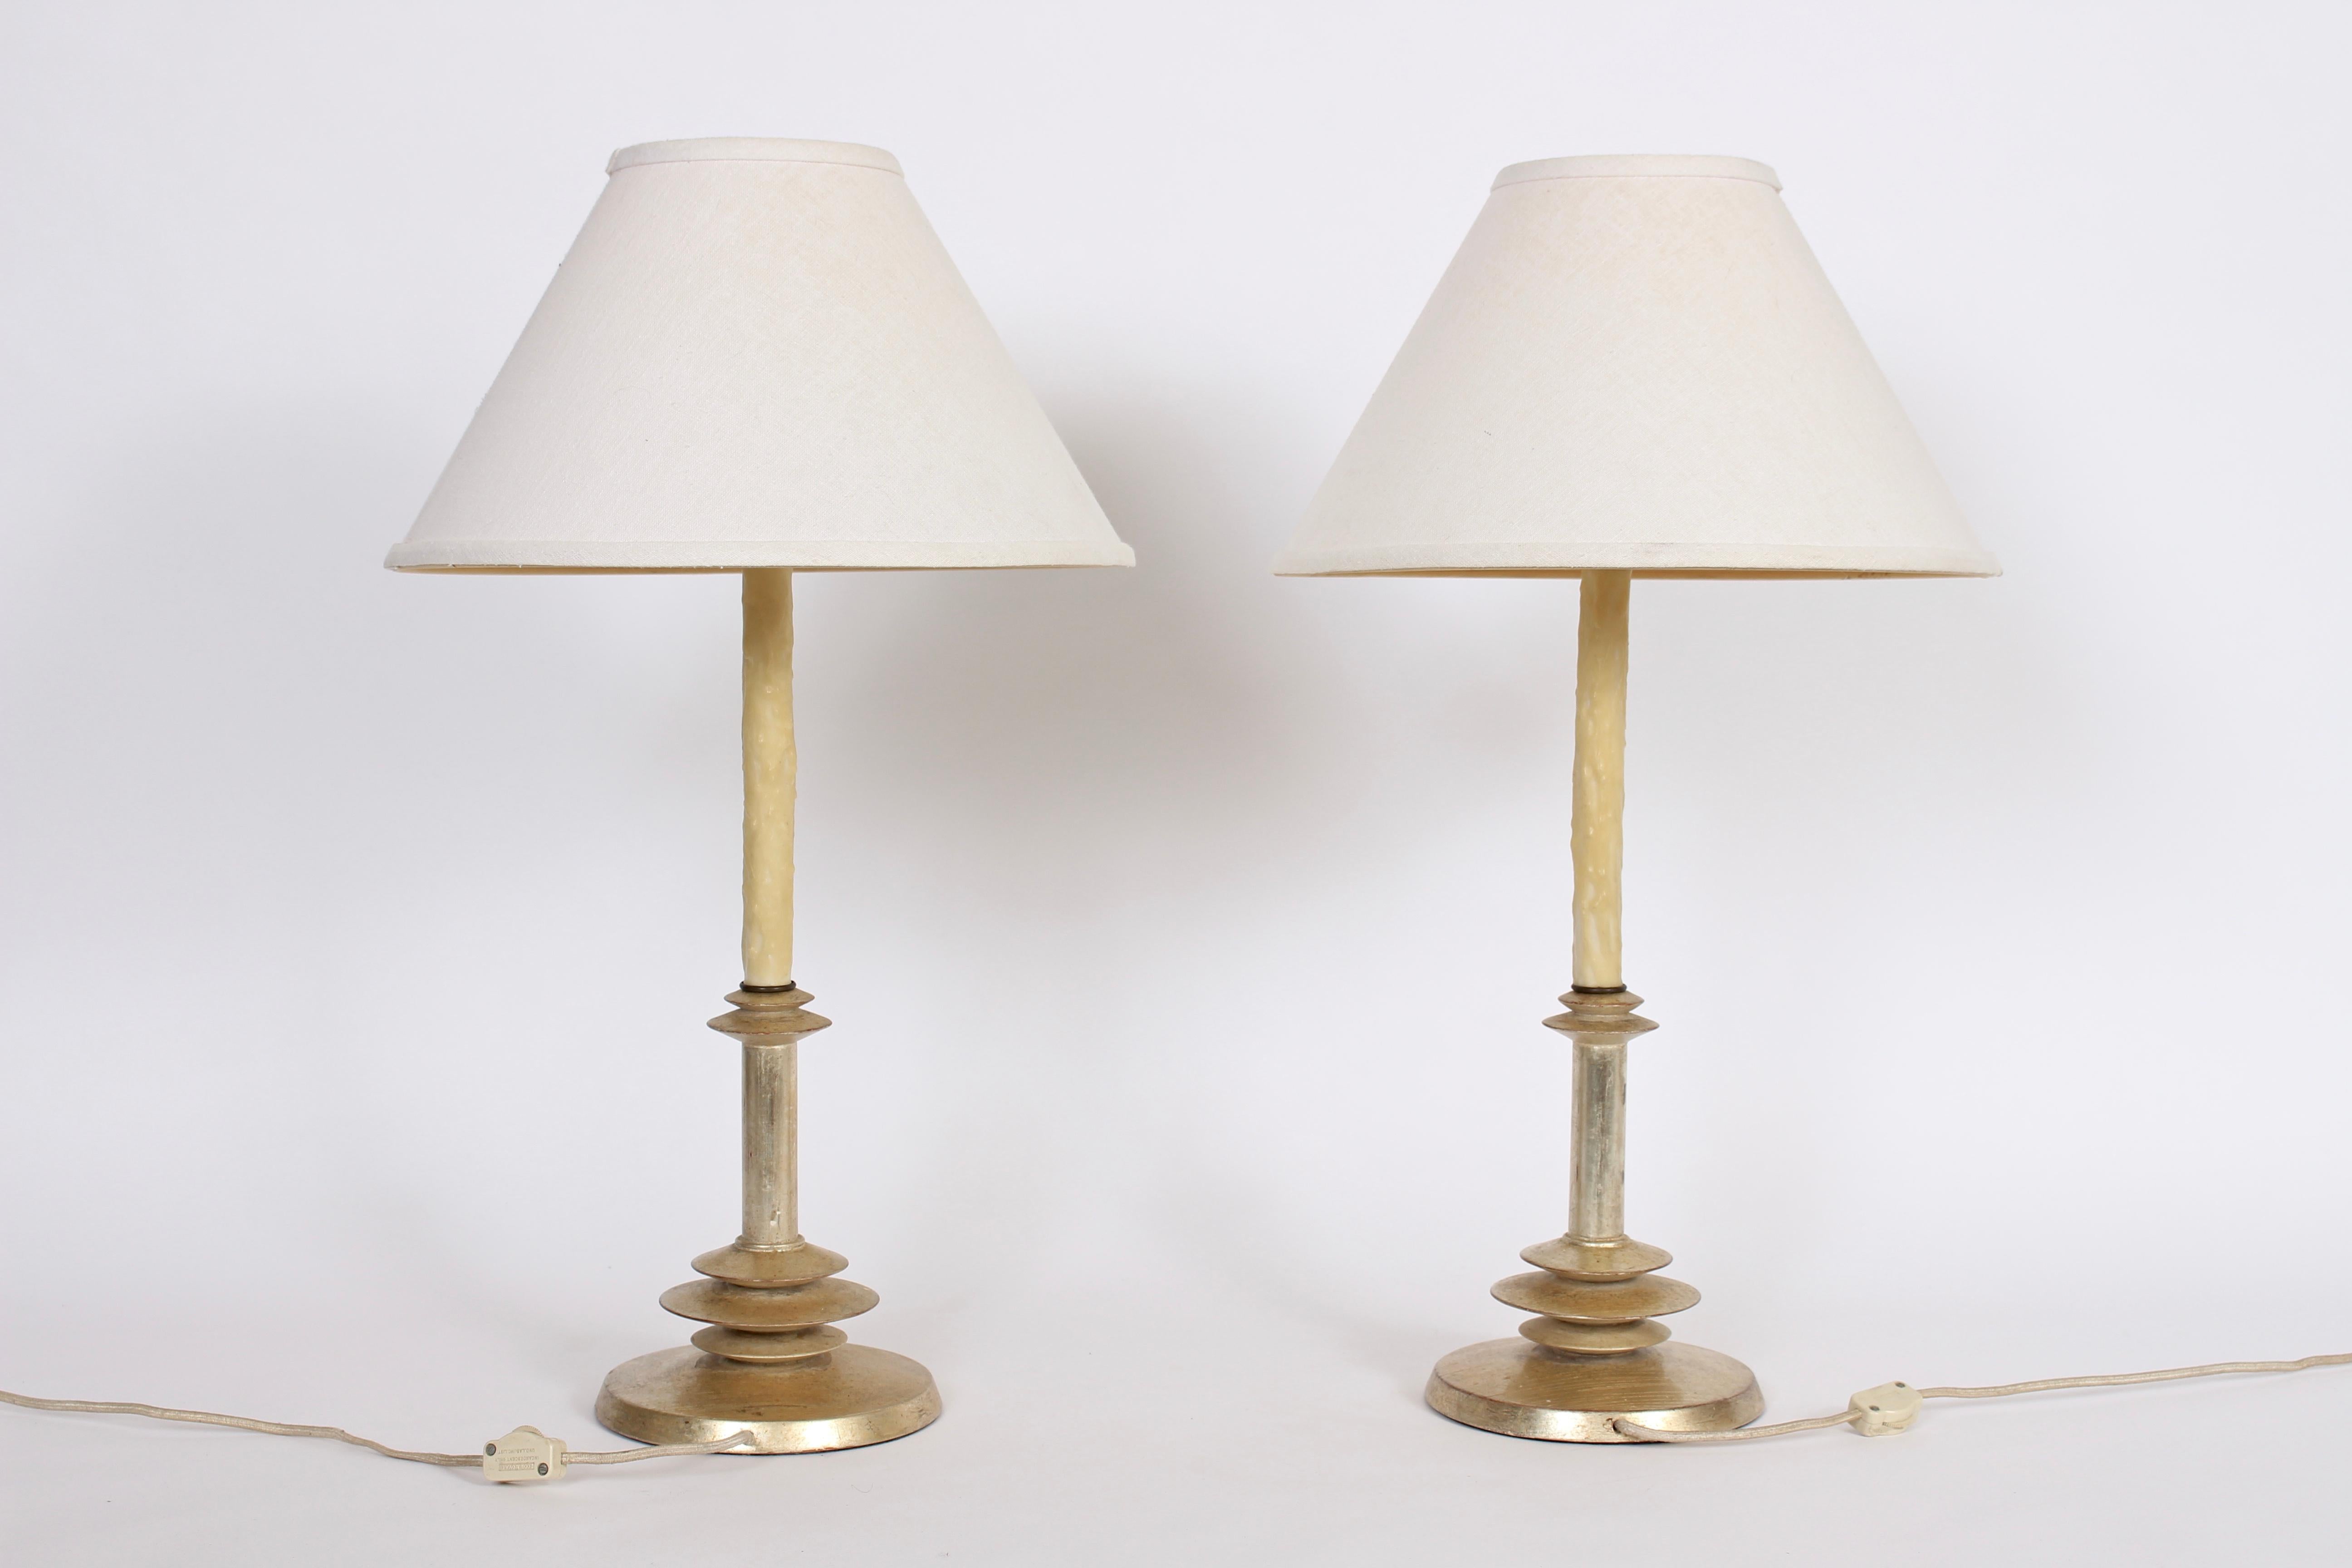 Hollywood Regency pair of Alberto Giacometti style gilt turned wood and waxed candlestick table lamps. Featuring a smooth turned wooden form, luxurious slivered antique gilding and creamed waxed candlestick column. Shades shown for display only (9H